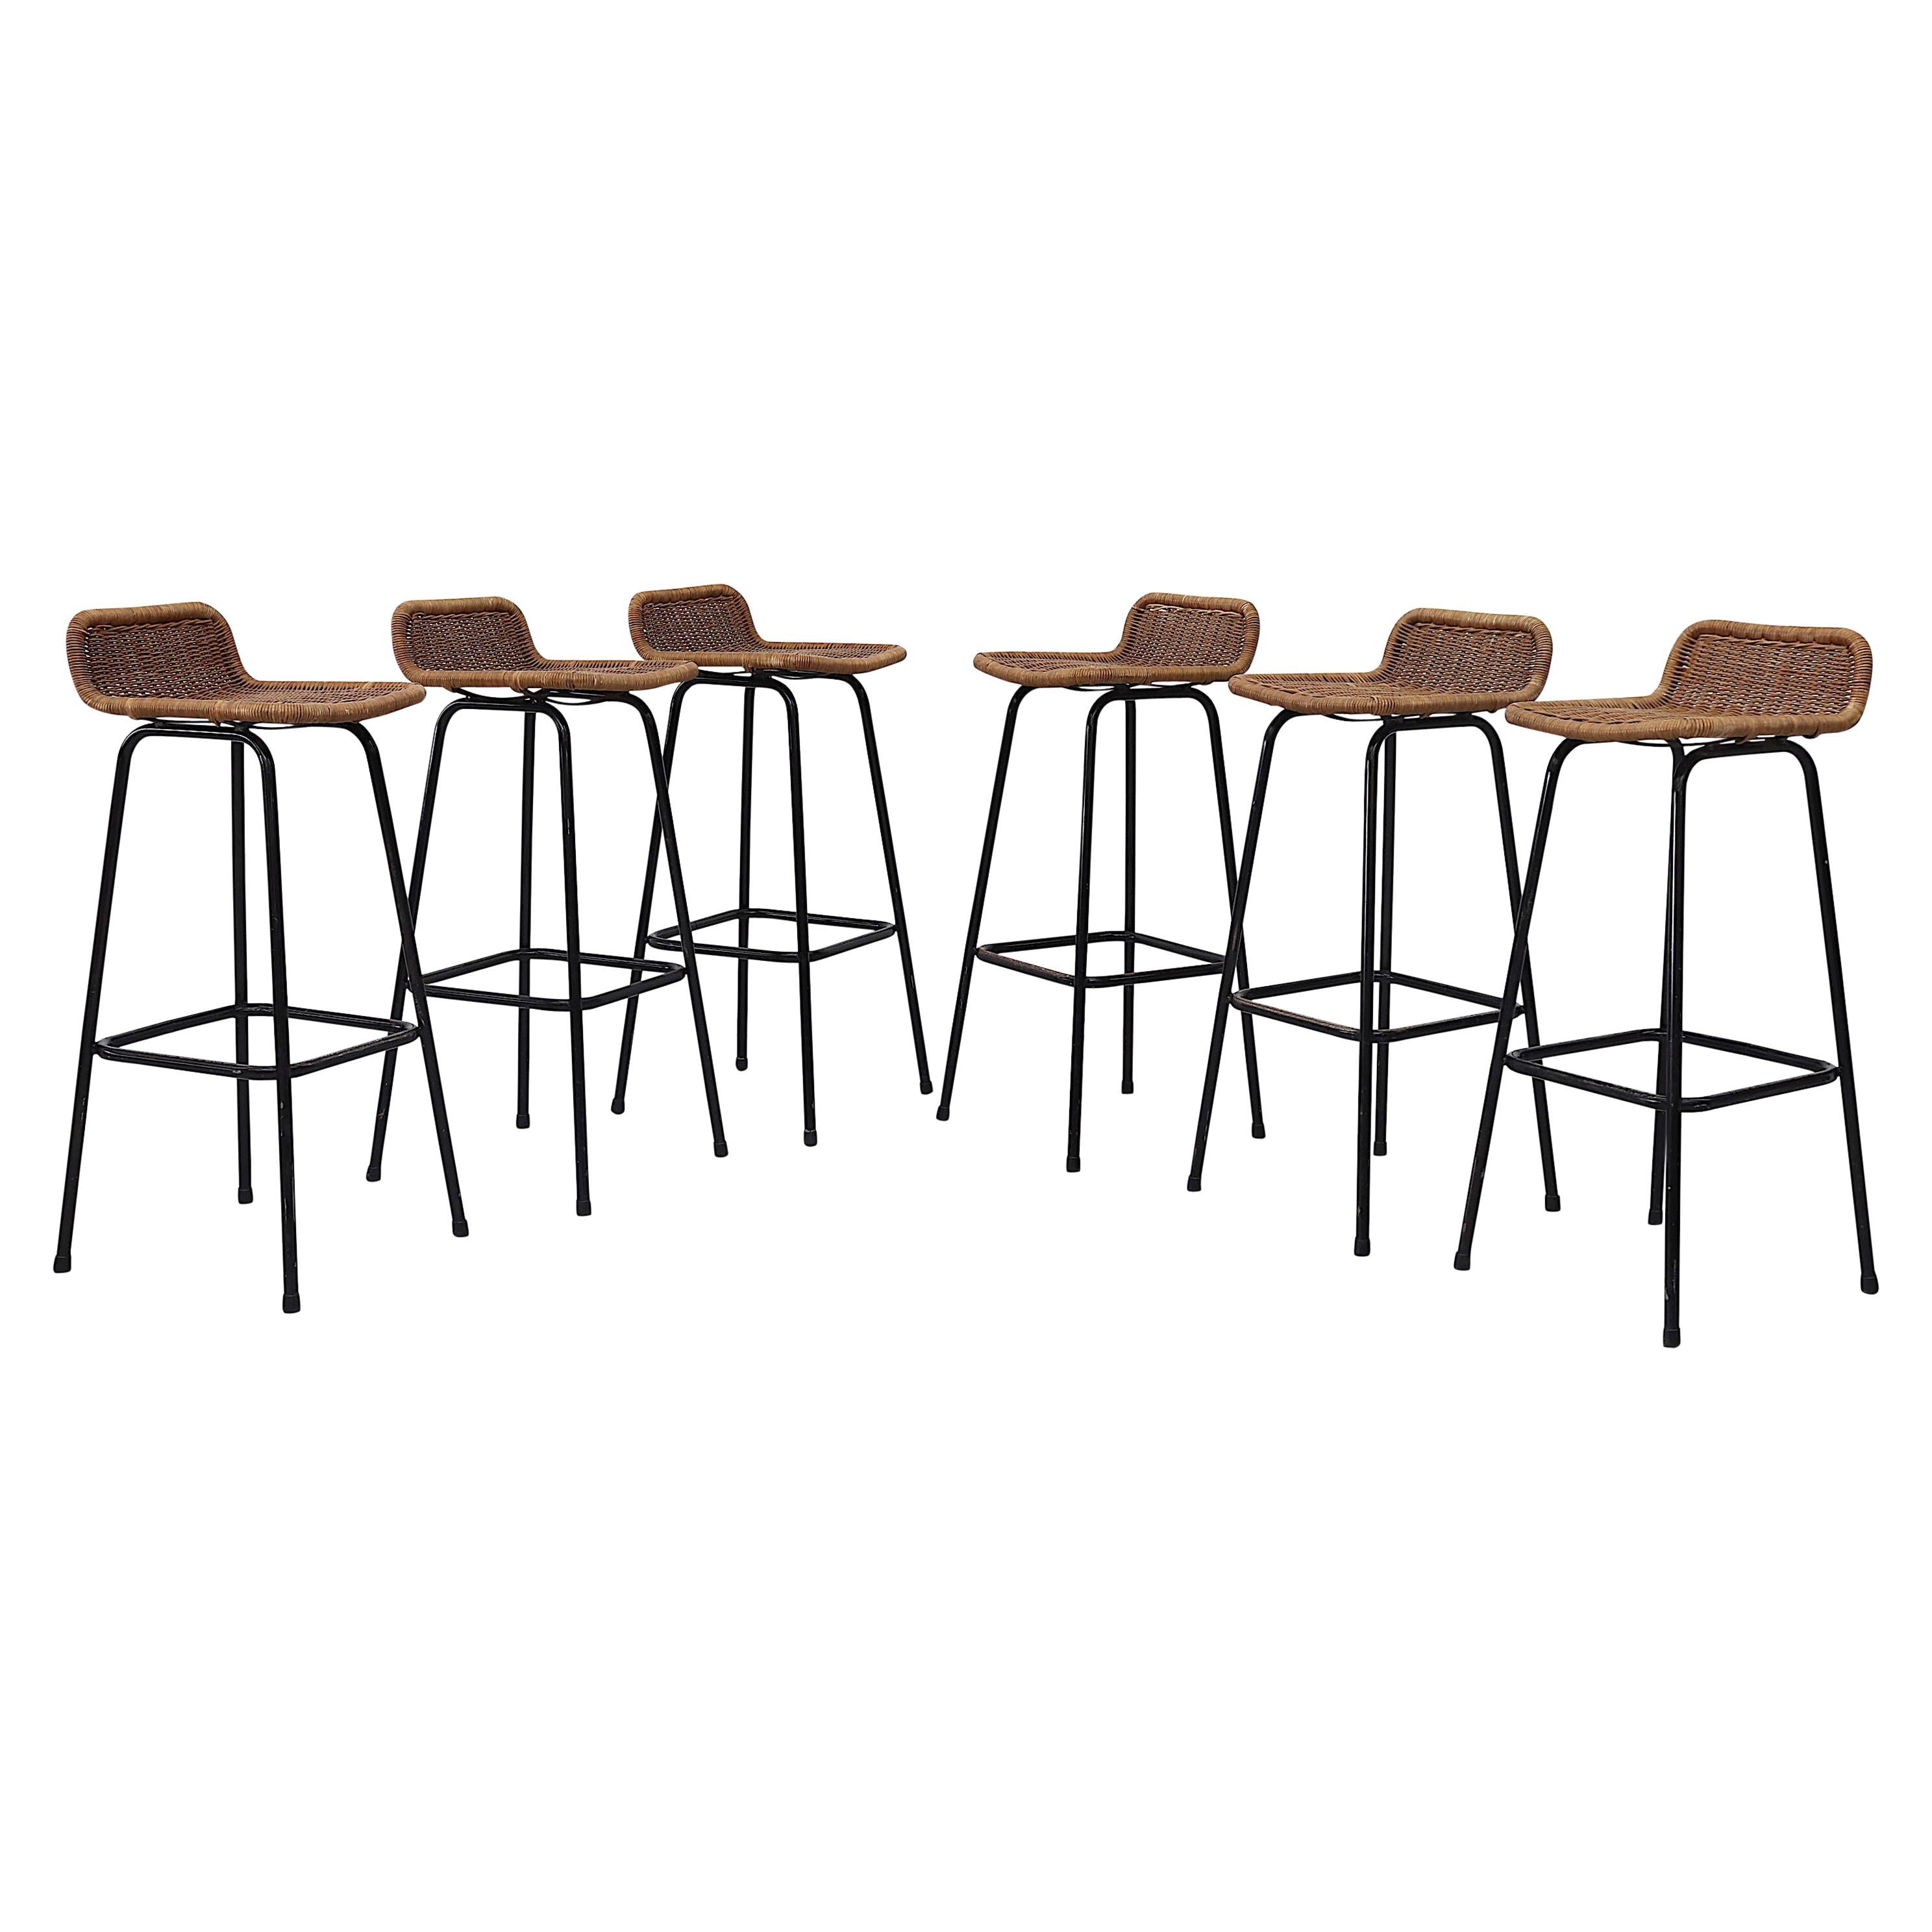 Charlotte Perriand Style Wicker Bar Stools